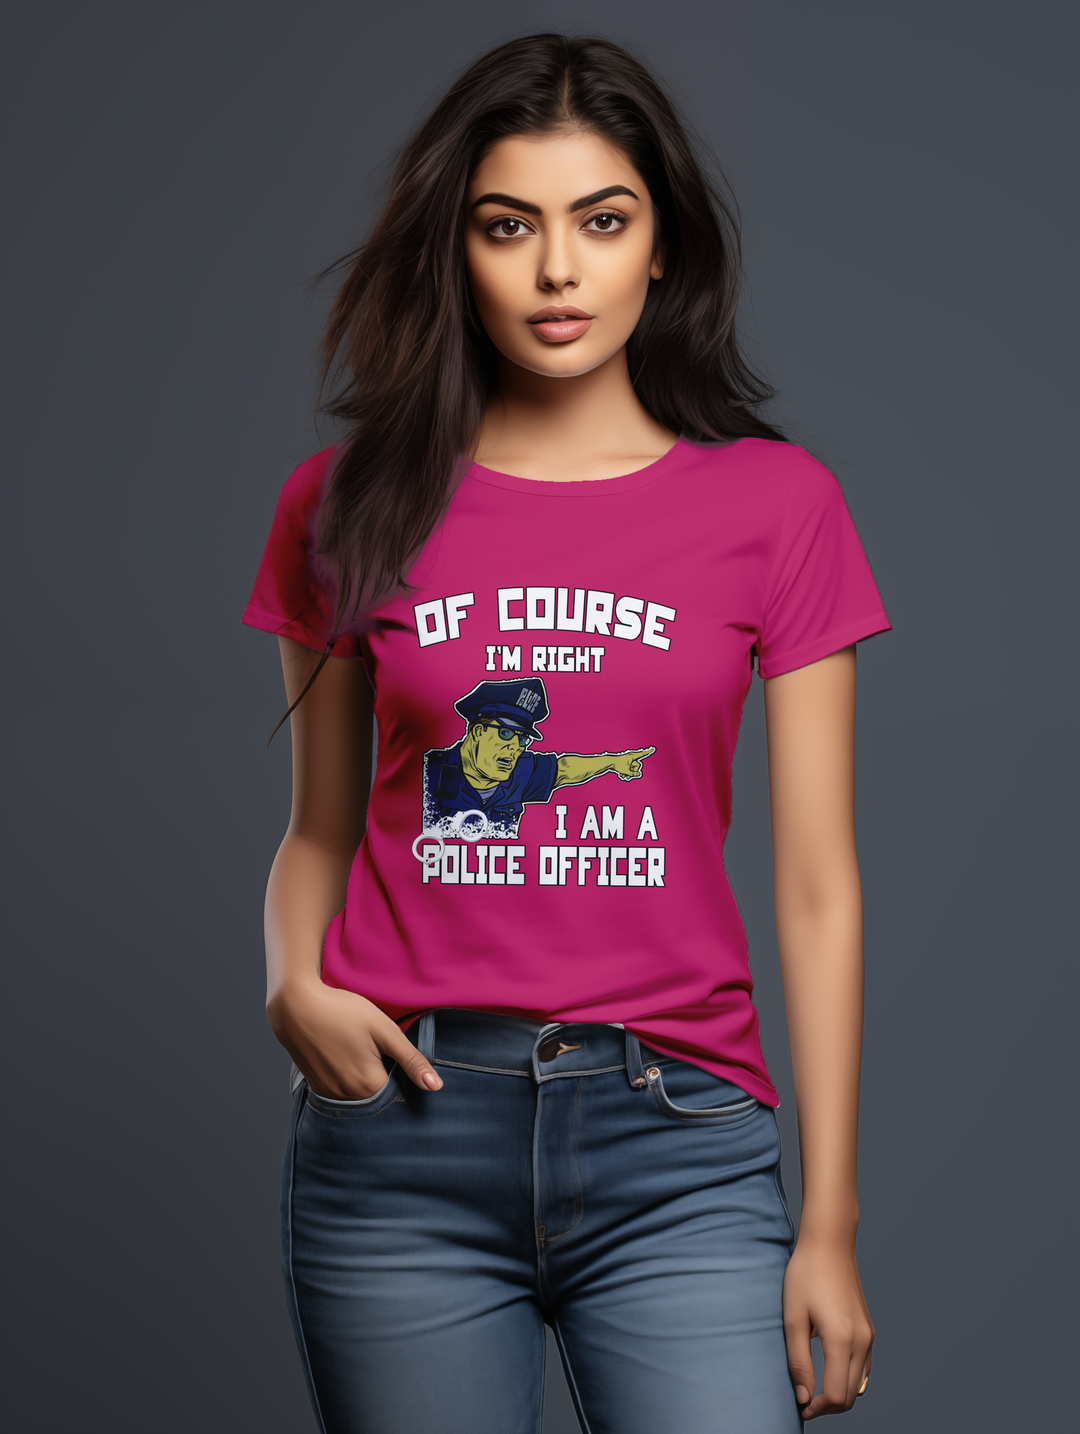 Womens Pink OfCourse I'm a Police Officer tee